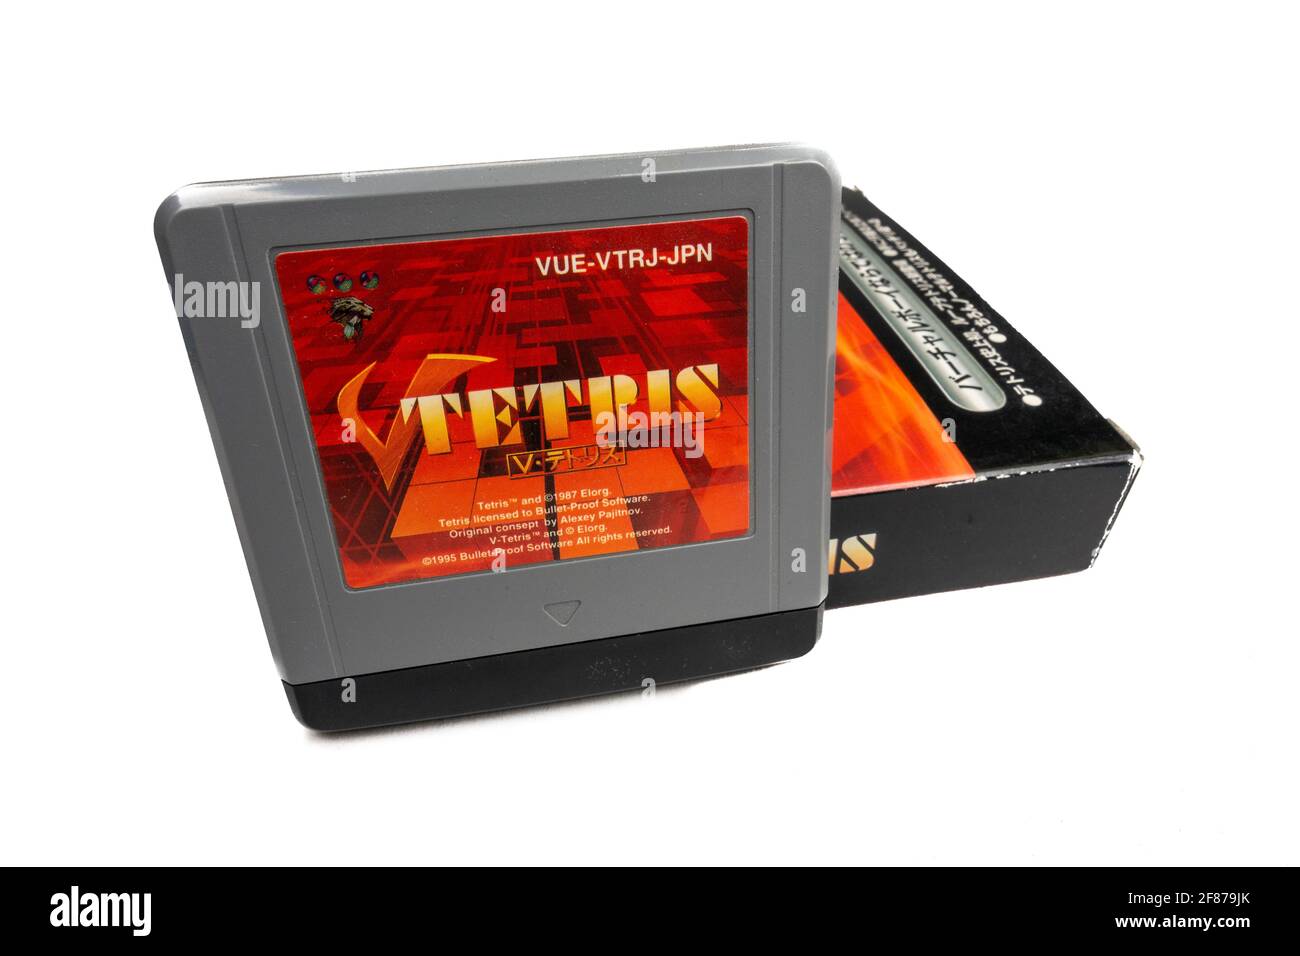 A Tetris game cartridge for the Nintendo Virtual Boy table-top video game console, first launched in Japan in 1995, (it did not launch in Europe). Stock Photo